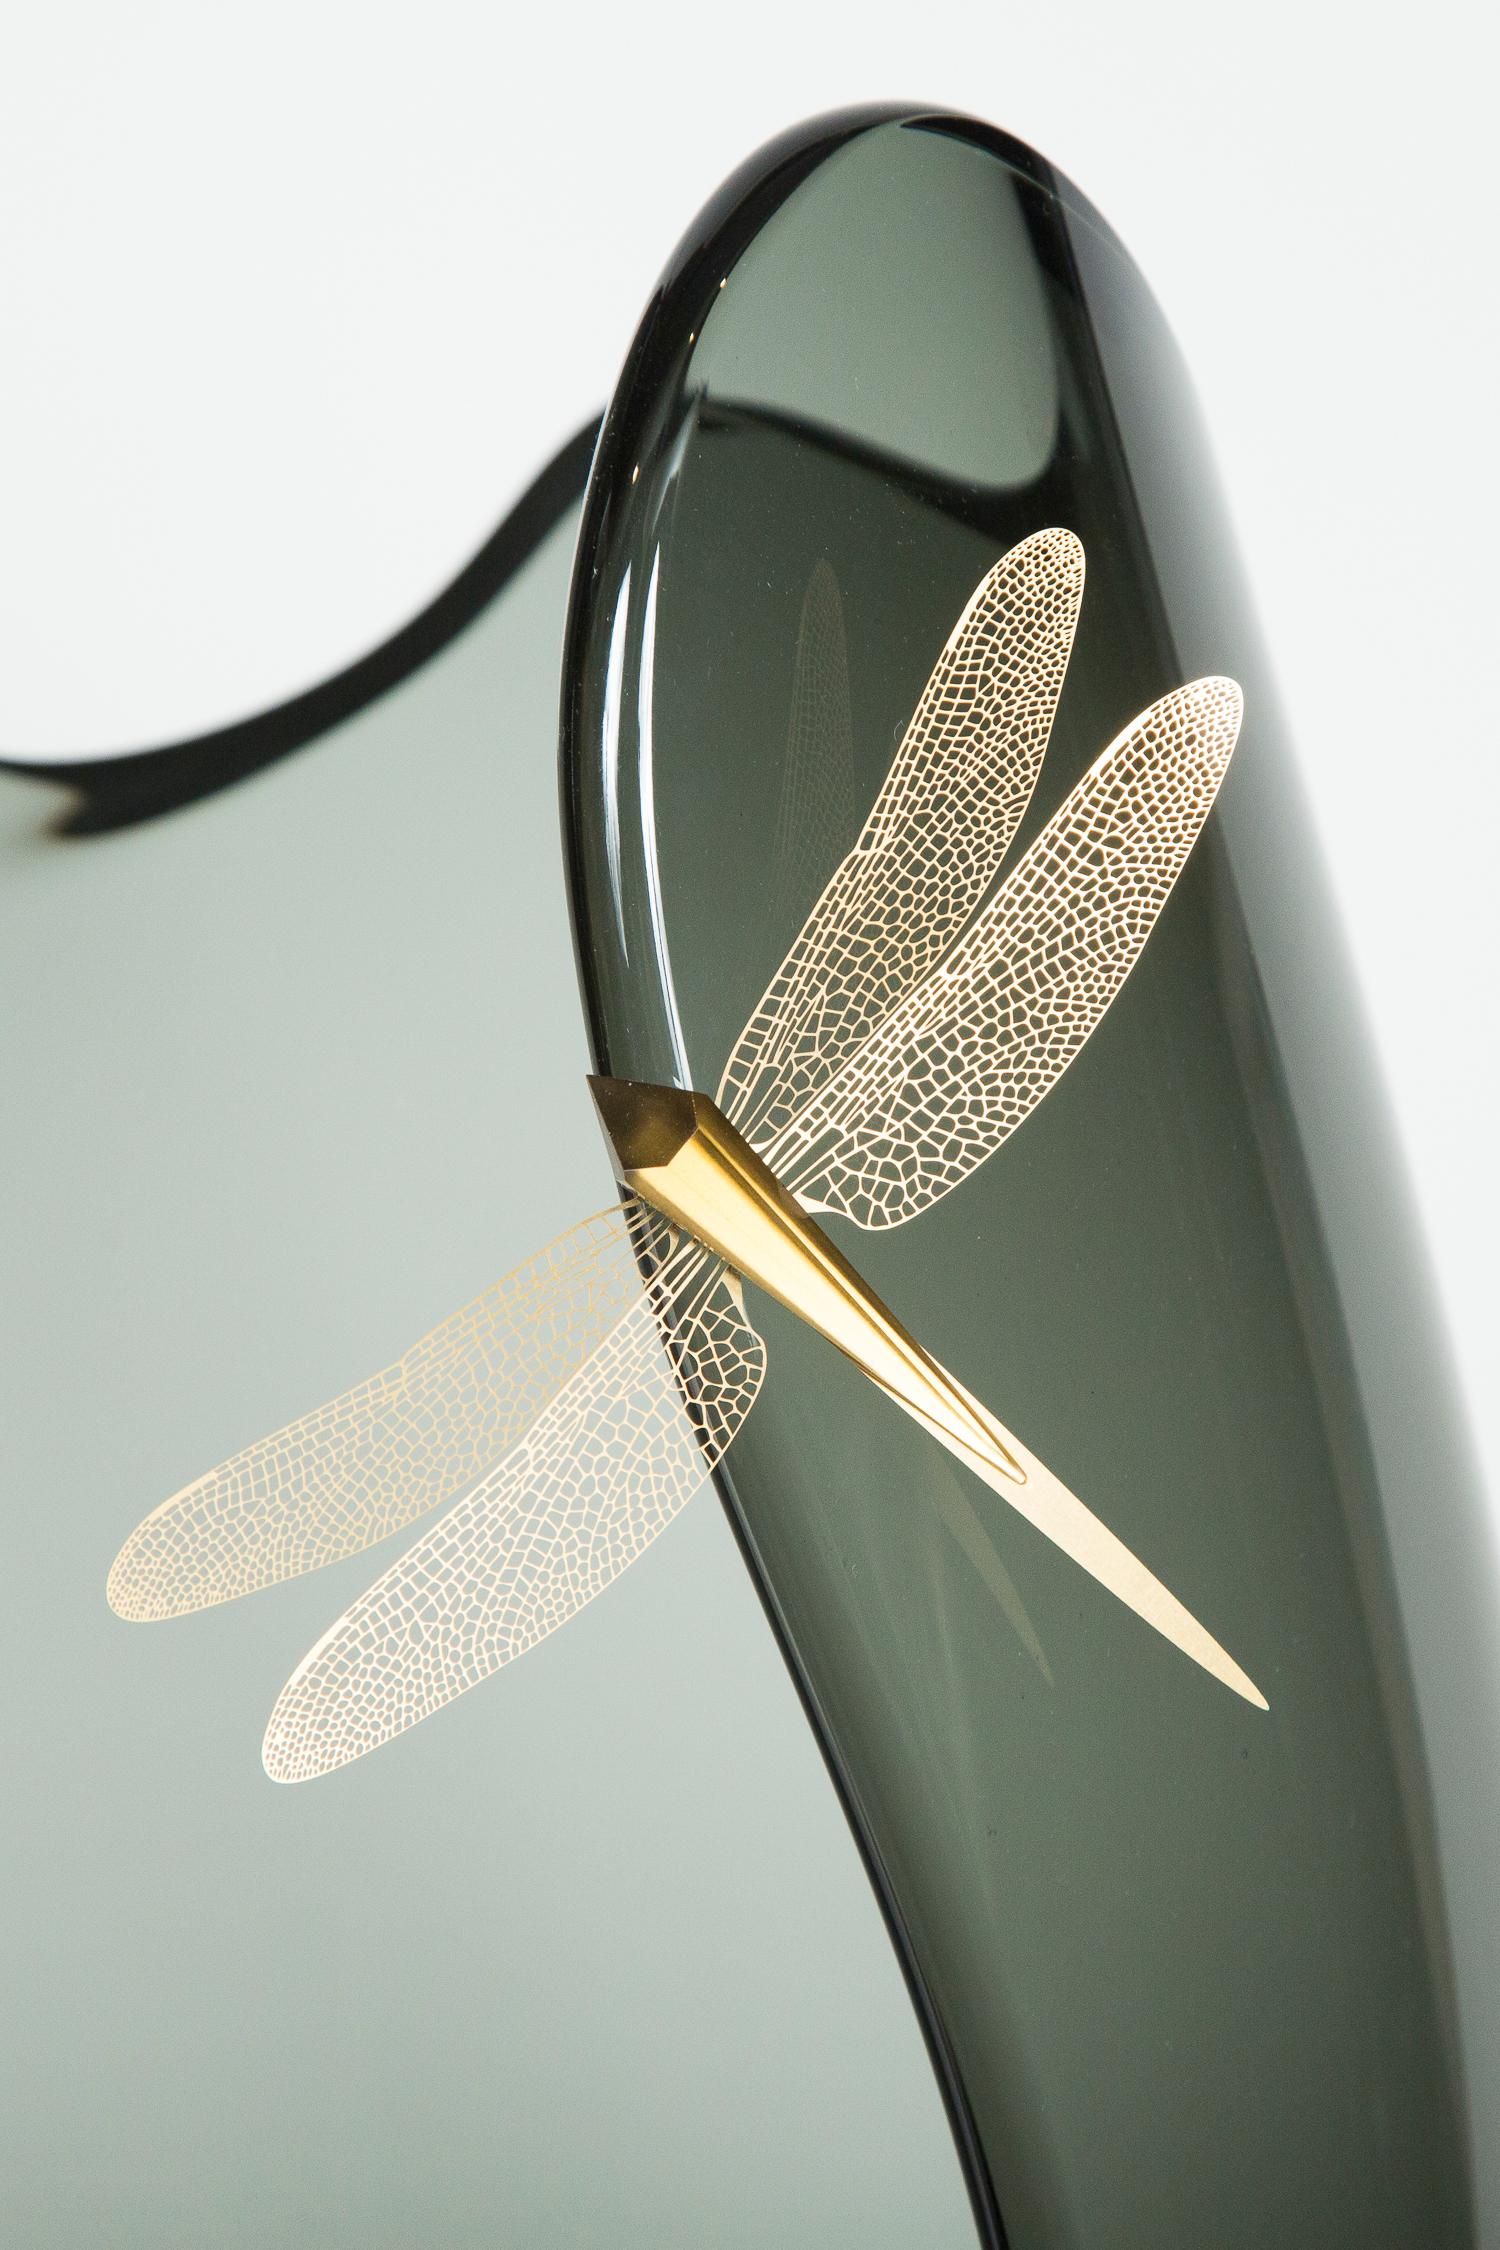 Fen III is a unique glass and gold plated steel sculpture by the Danish artist Hanne Enemark. The glass body has been hand-blown and painstakingly cut to create dramatic and sweeping curves that traverse its soft-edged rim. Each dragonfly is made